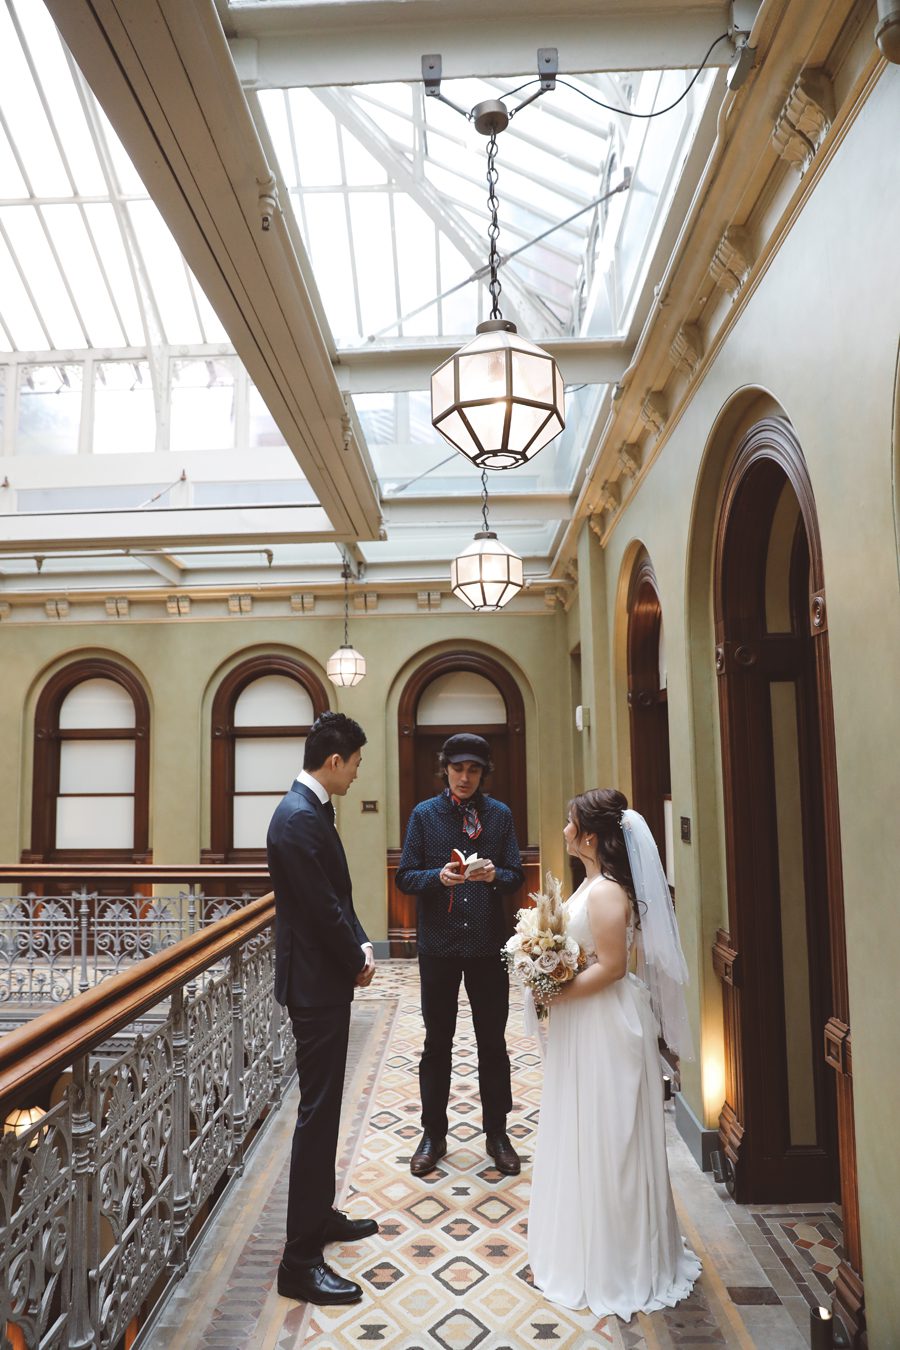 Couple getting married at the Beekman Hotel